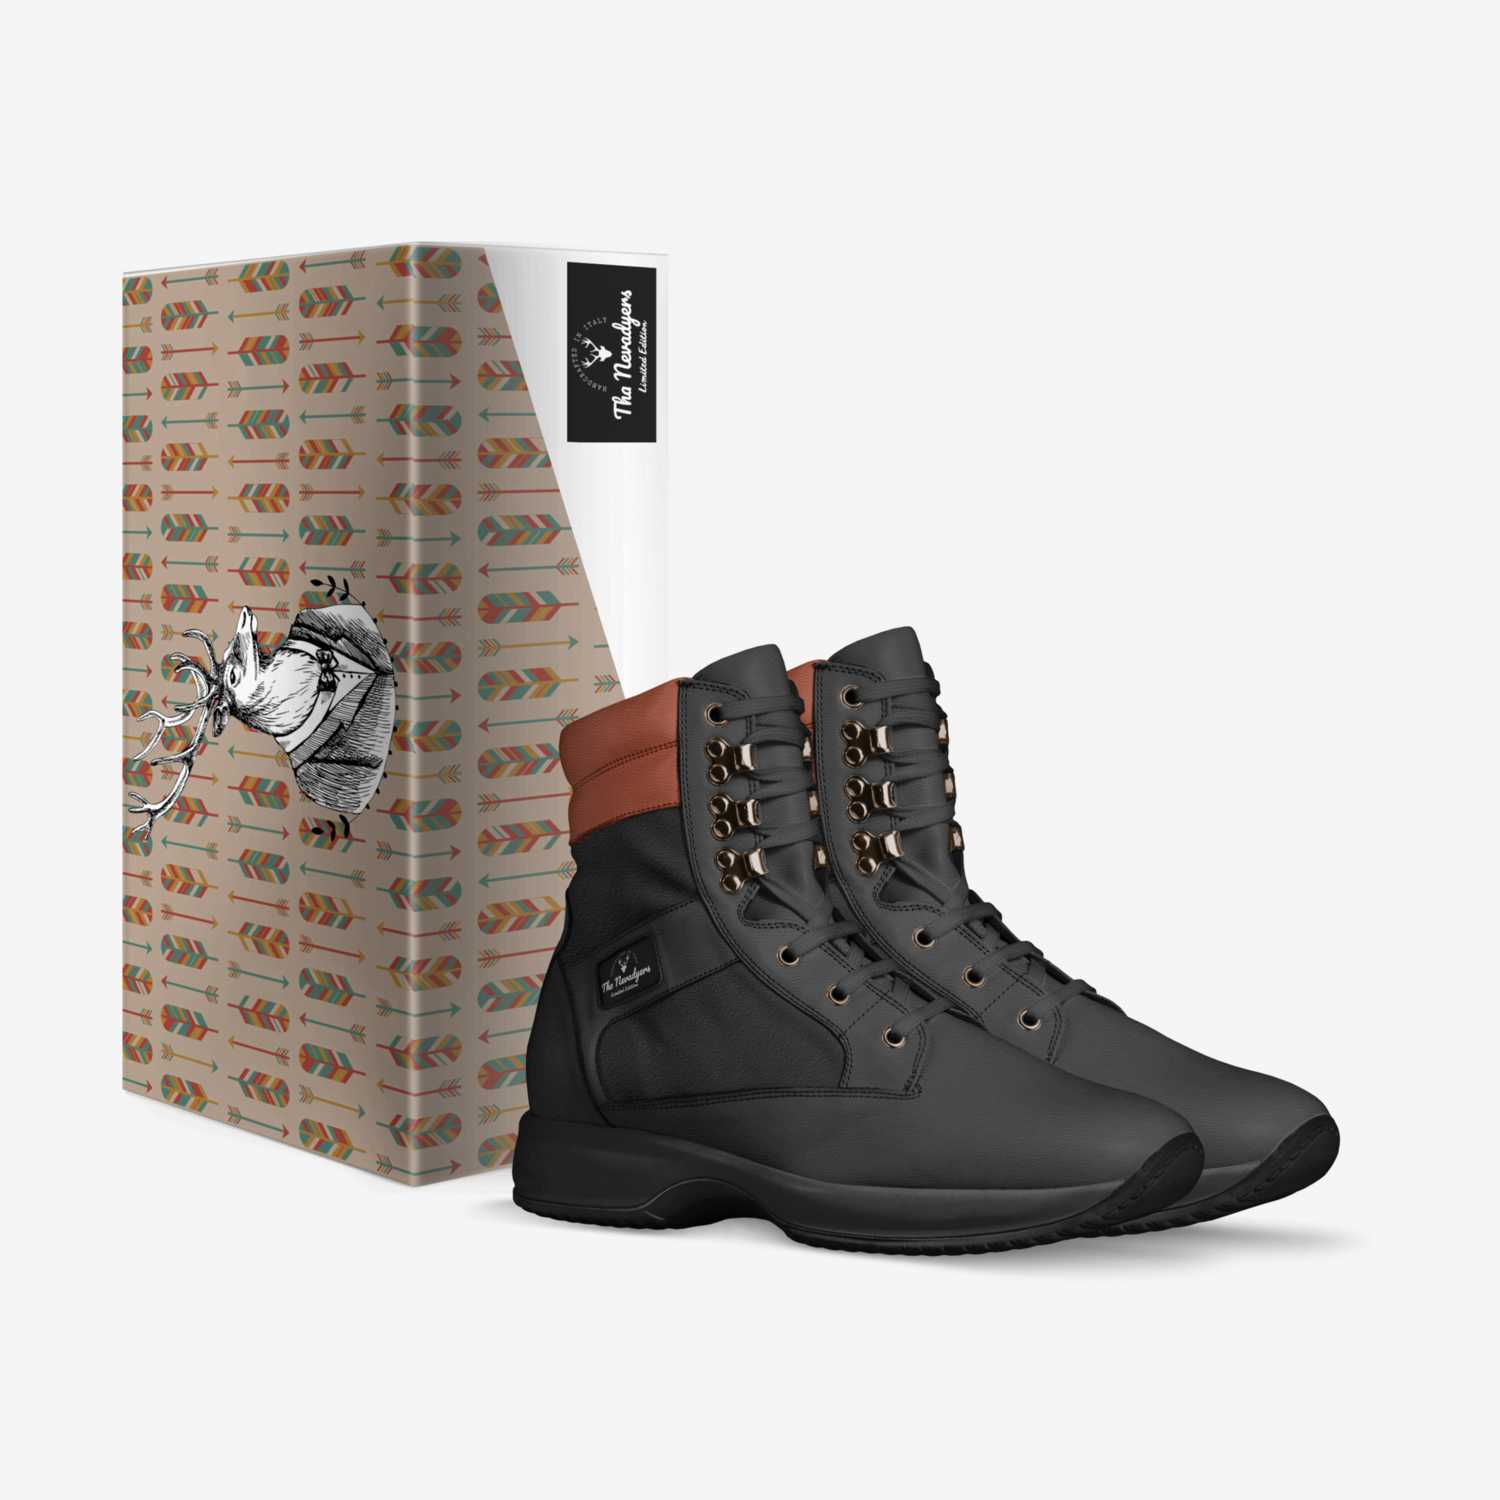 Smokers Boot "Ash" custom made in Italy shoes by Galatikz Dixon | Box view